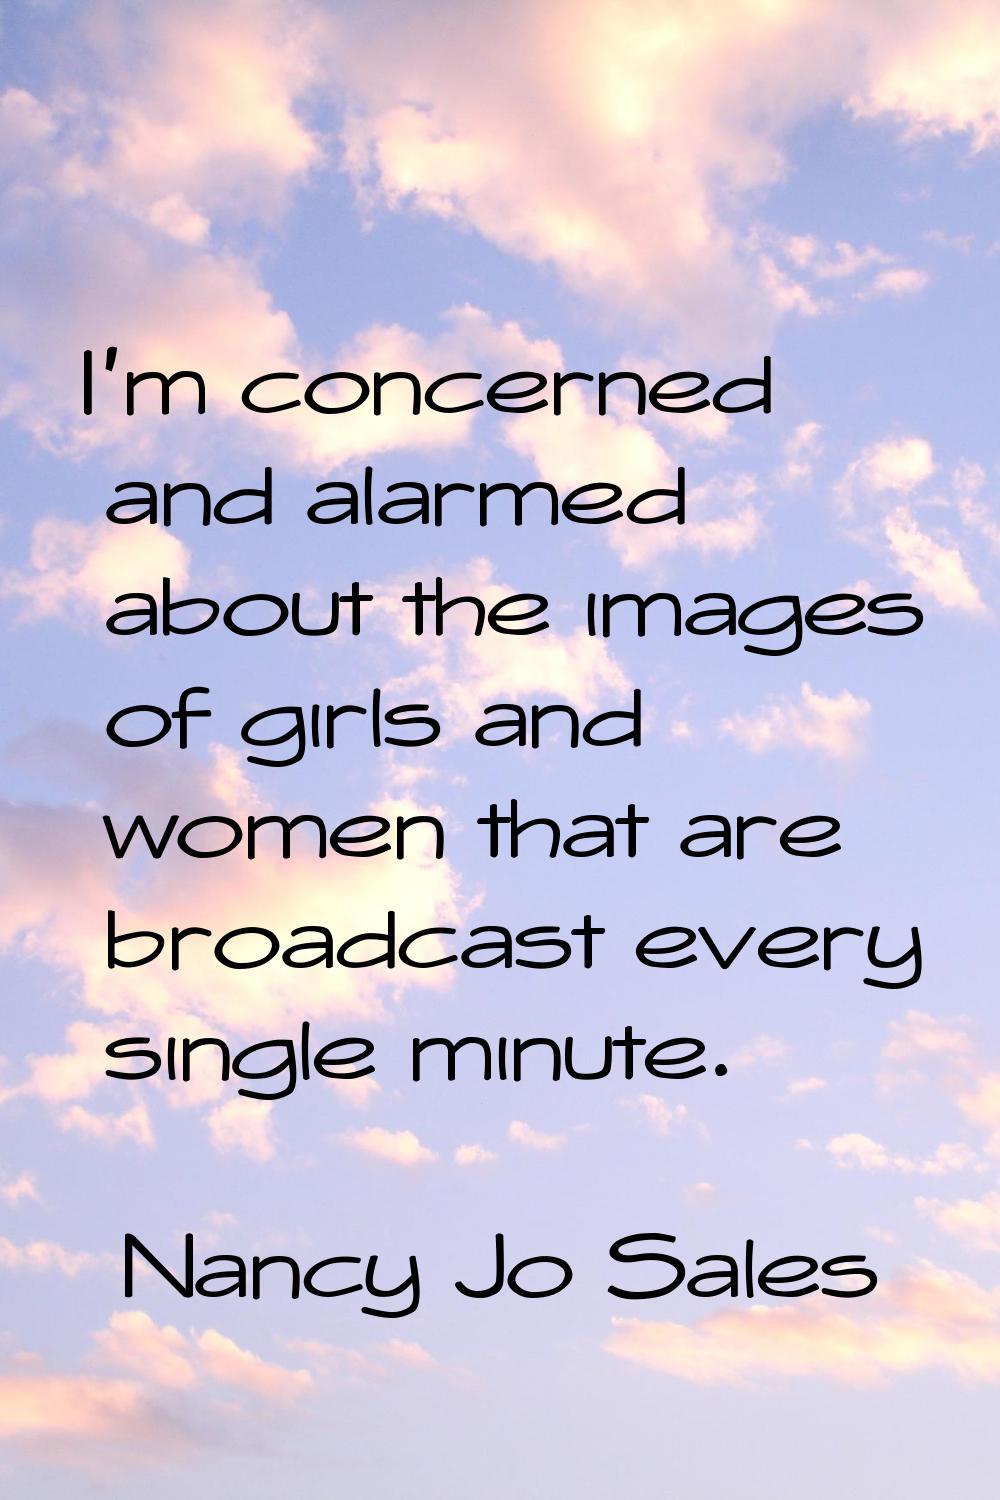 I'm concerned and alarmed about the images of girls and women that are broadcast every single minut